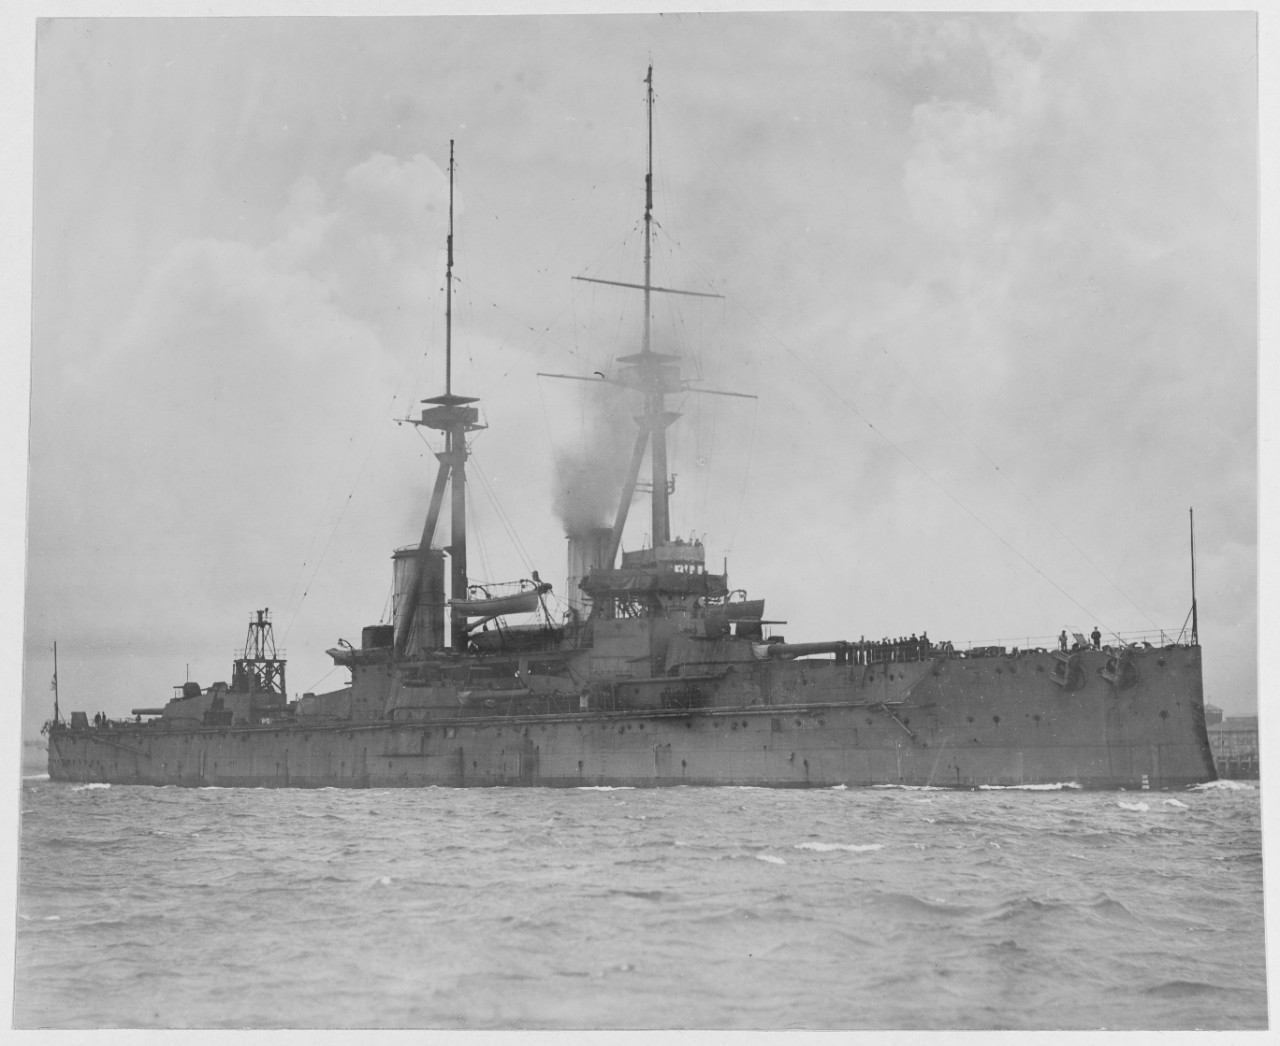 Photo #: NH 61639  HMS Bellerophon For a MEDIUM RESOLUTION IMAGE, click the thumbnail.